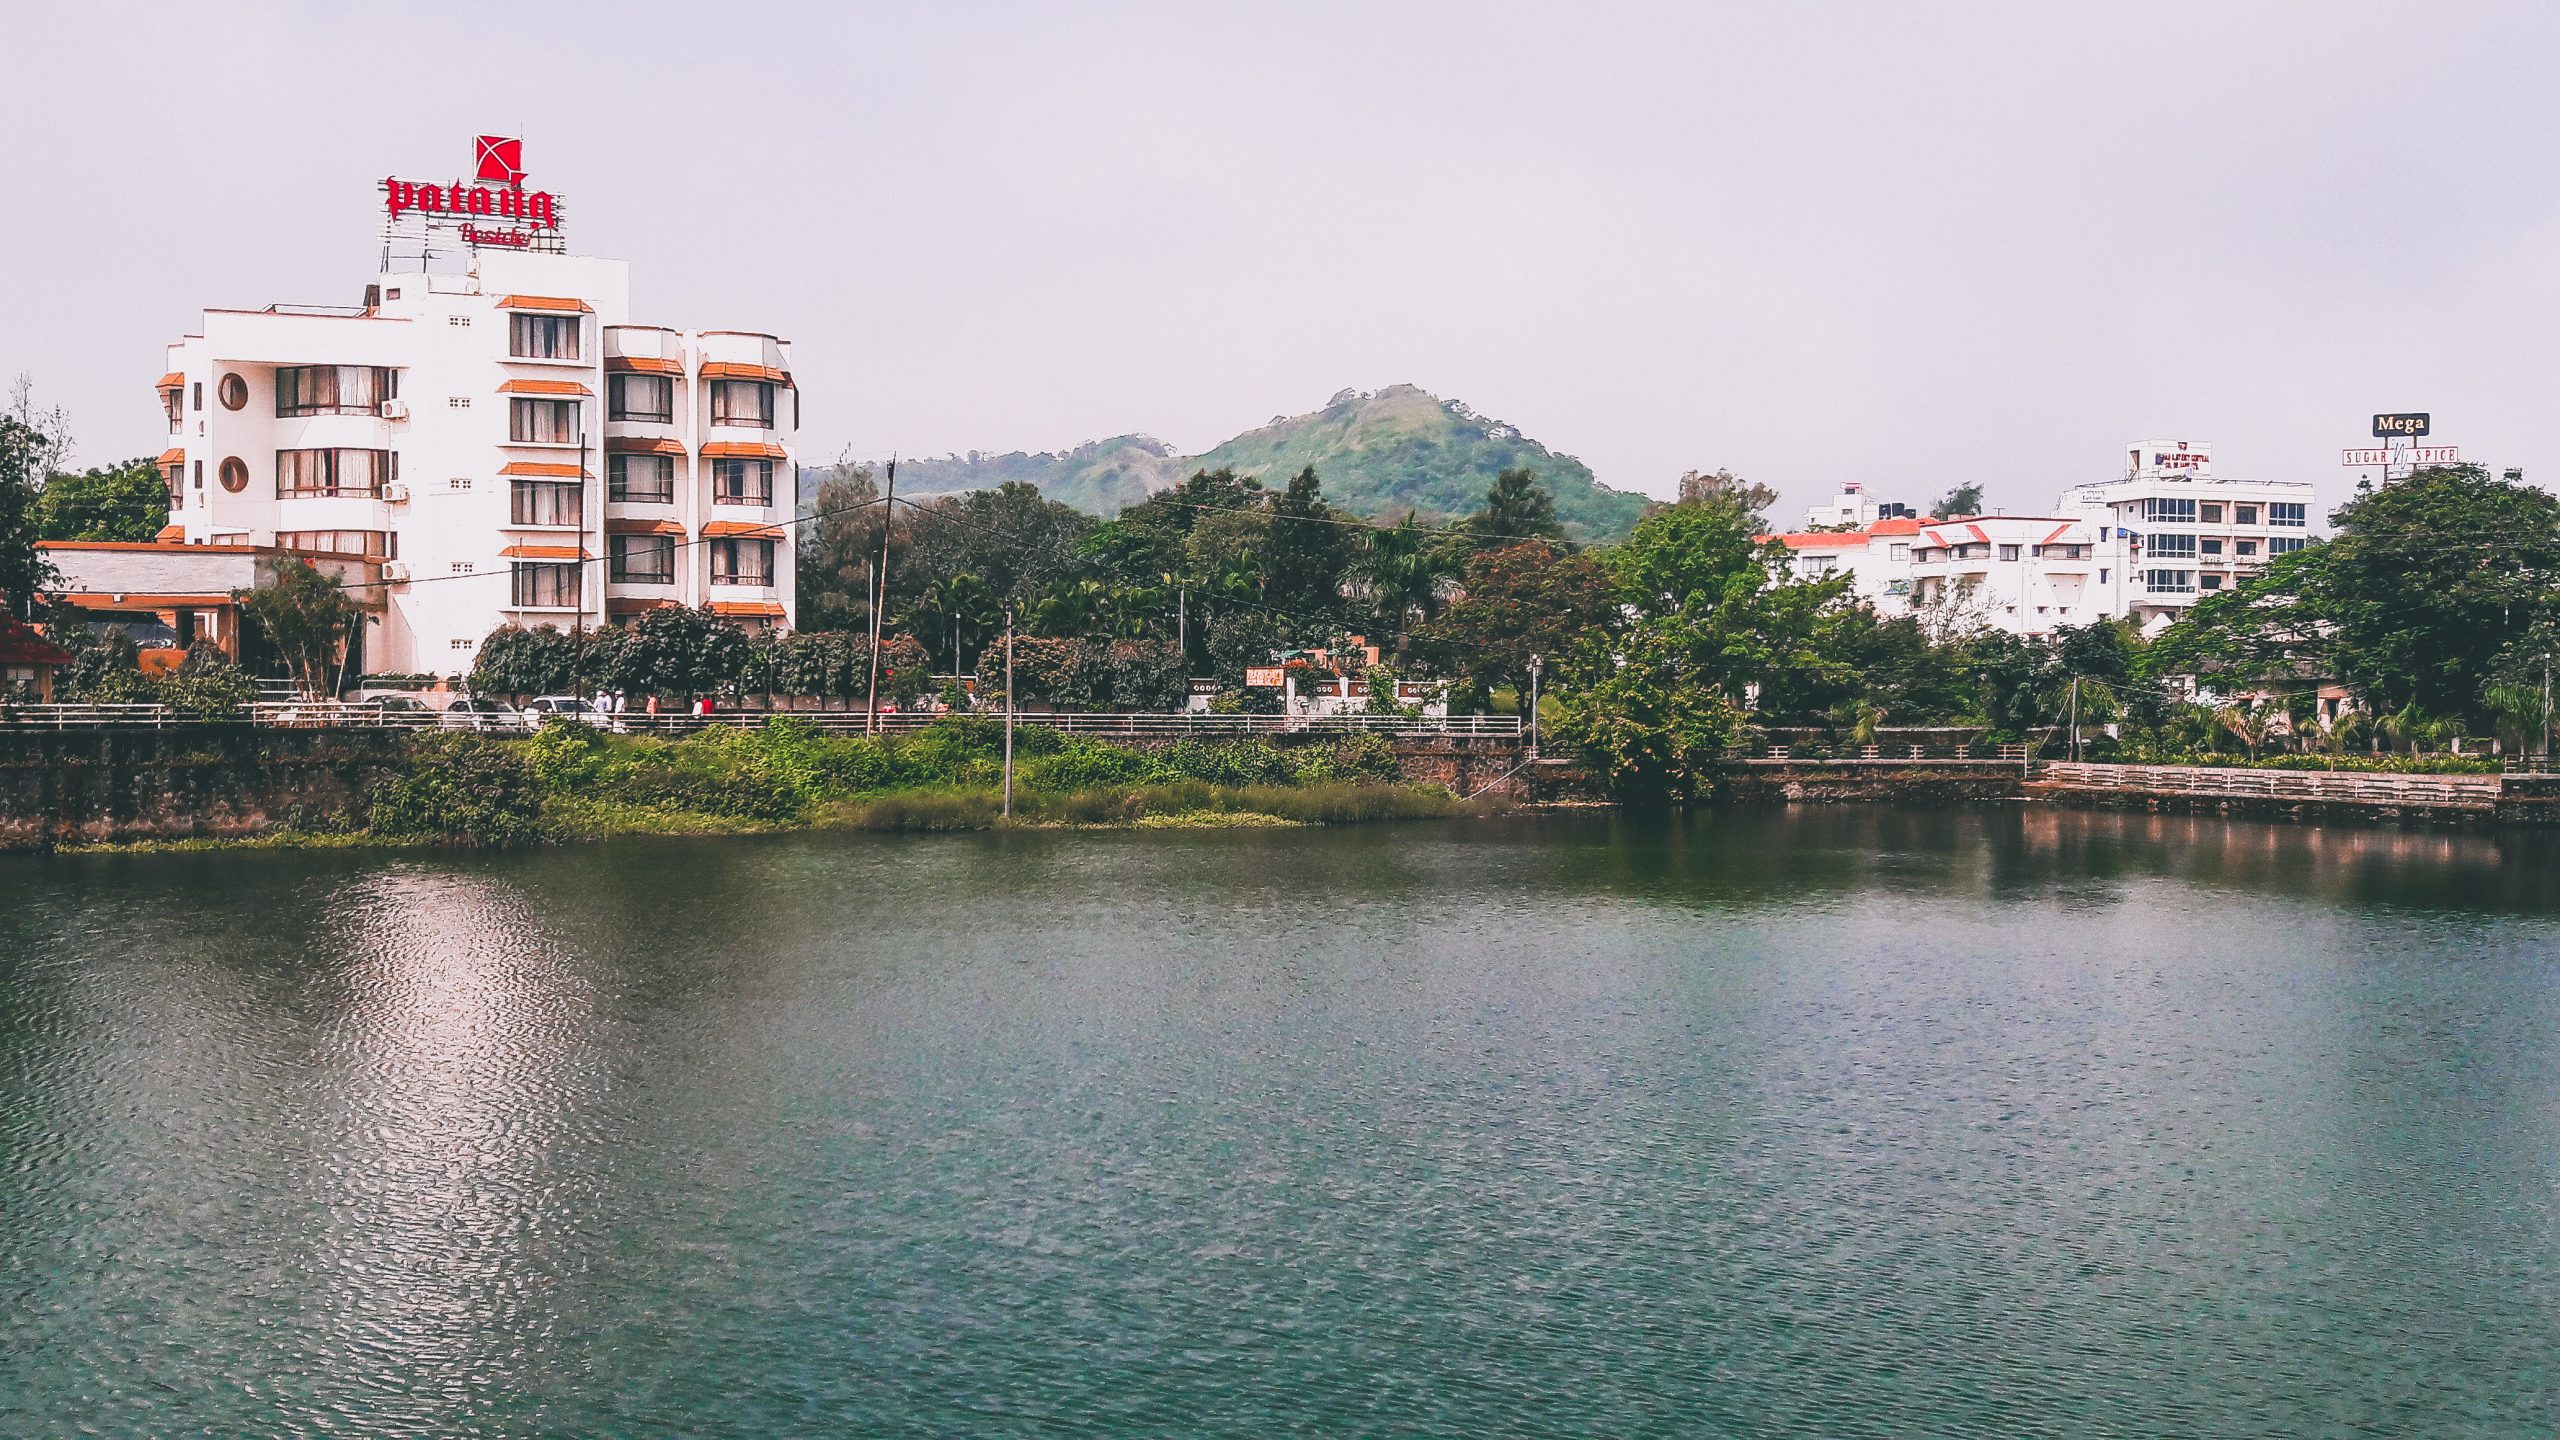 A lake and buildings